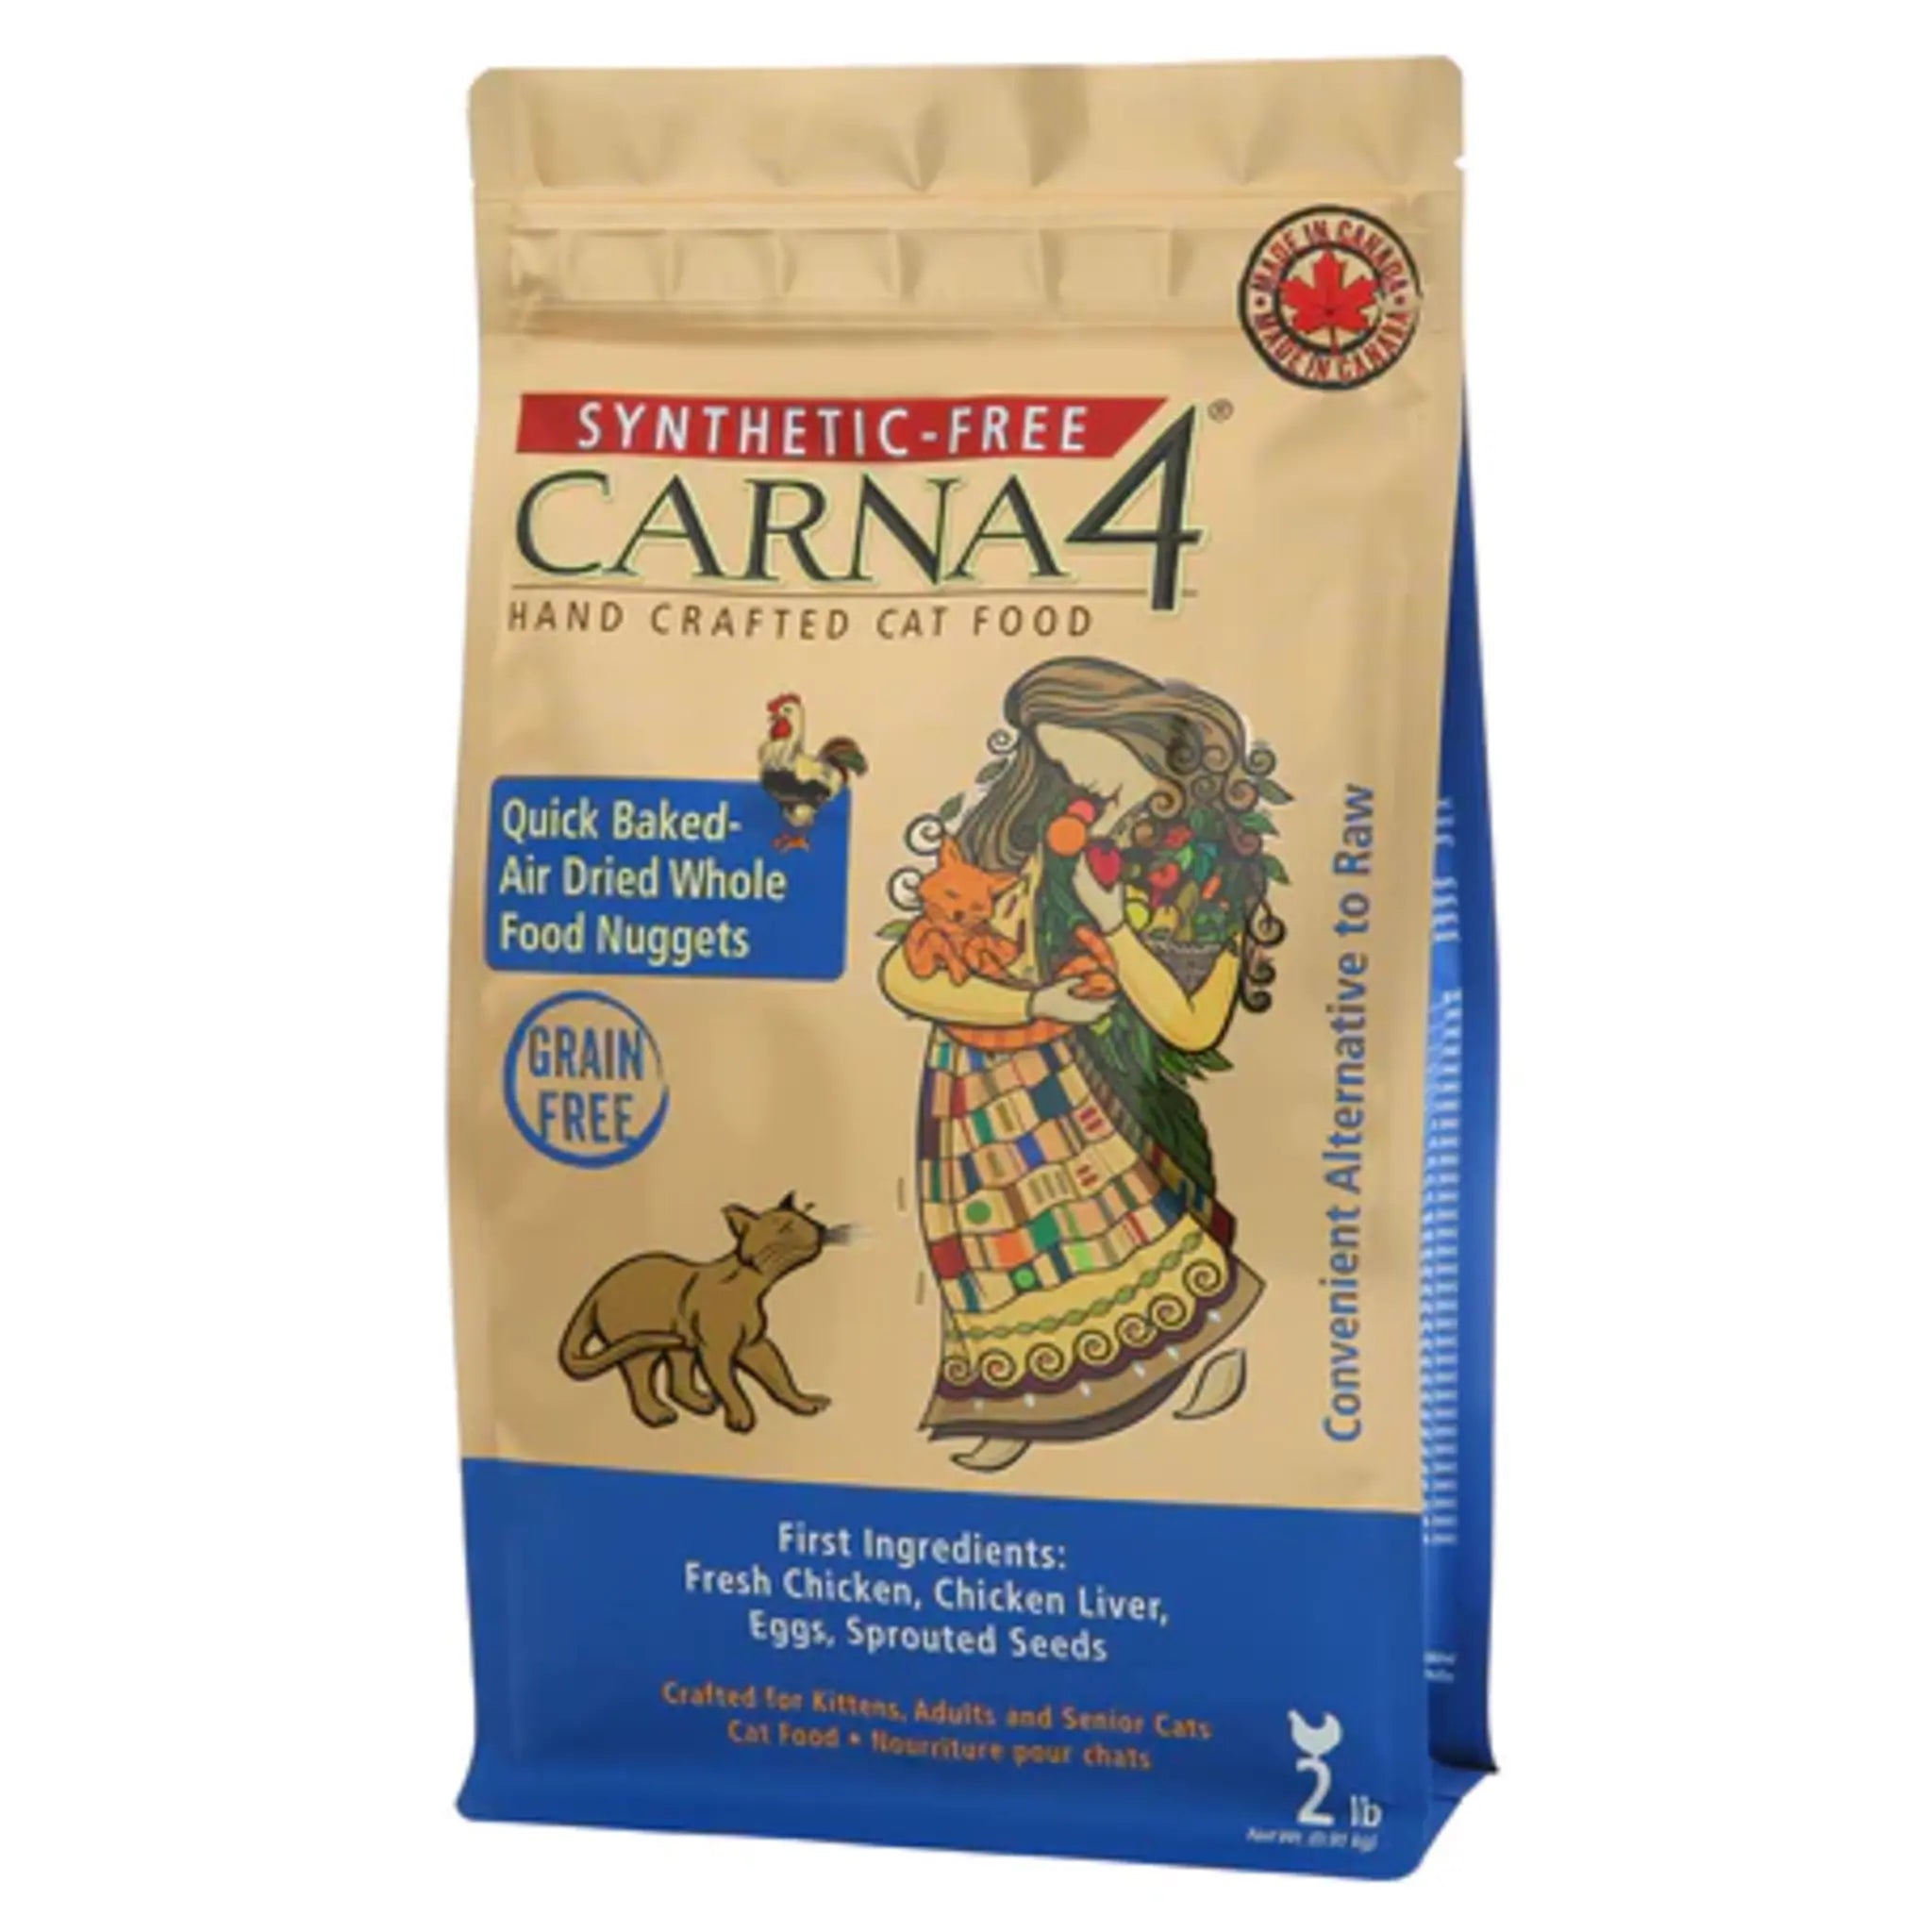 A bag of Carna4 Hand Crafted Cat Food, Chicken Recipe, Made in Canada, Synthetic-Free, 2 lb.